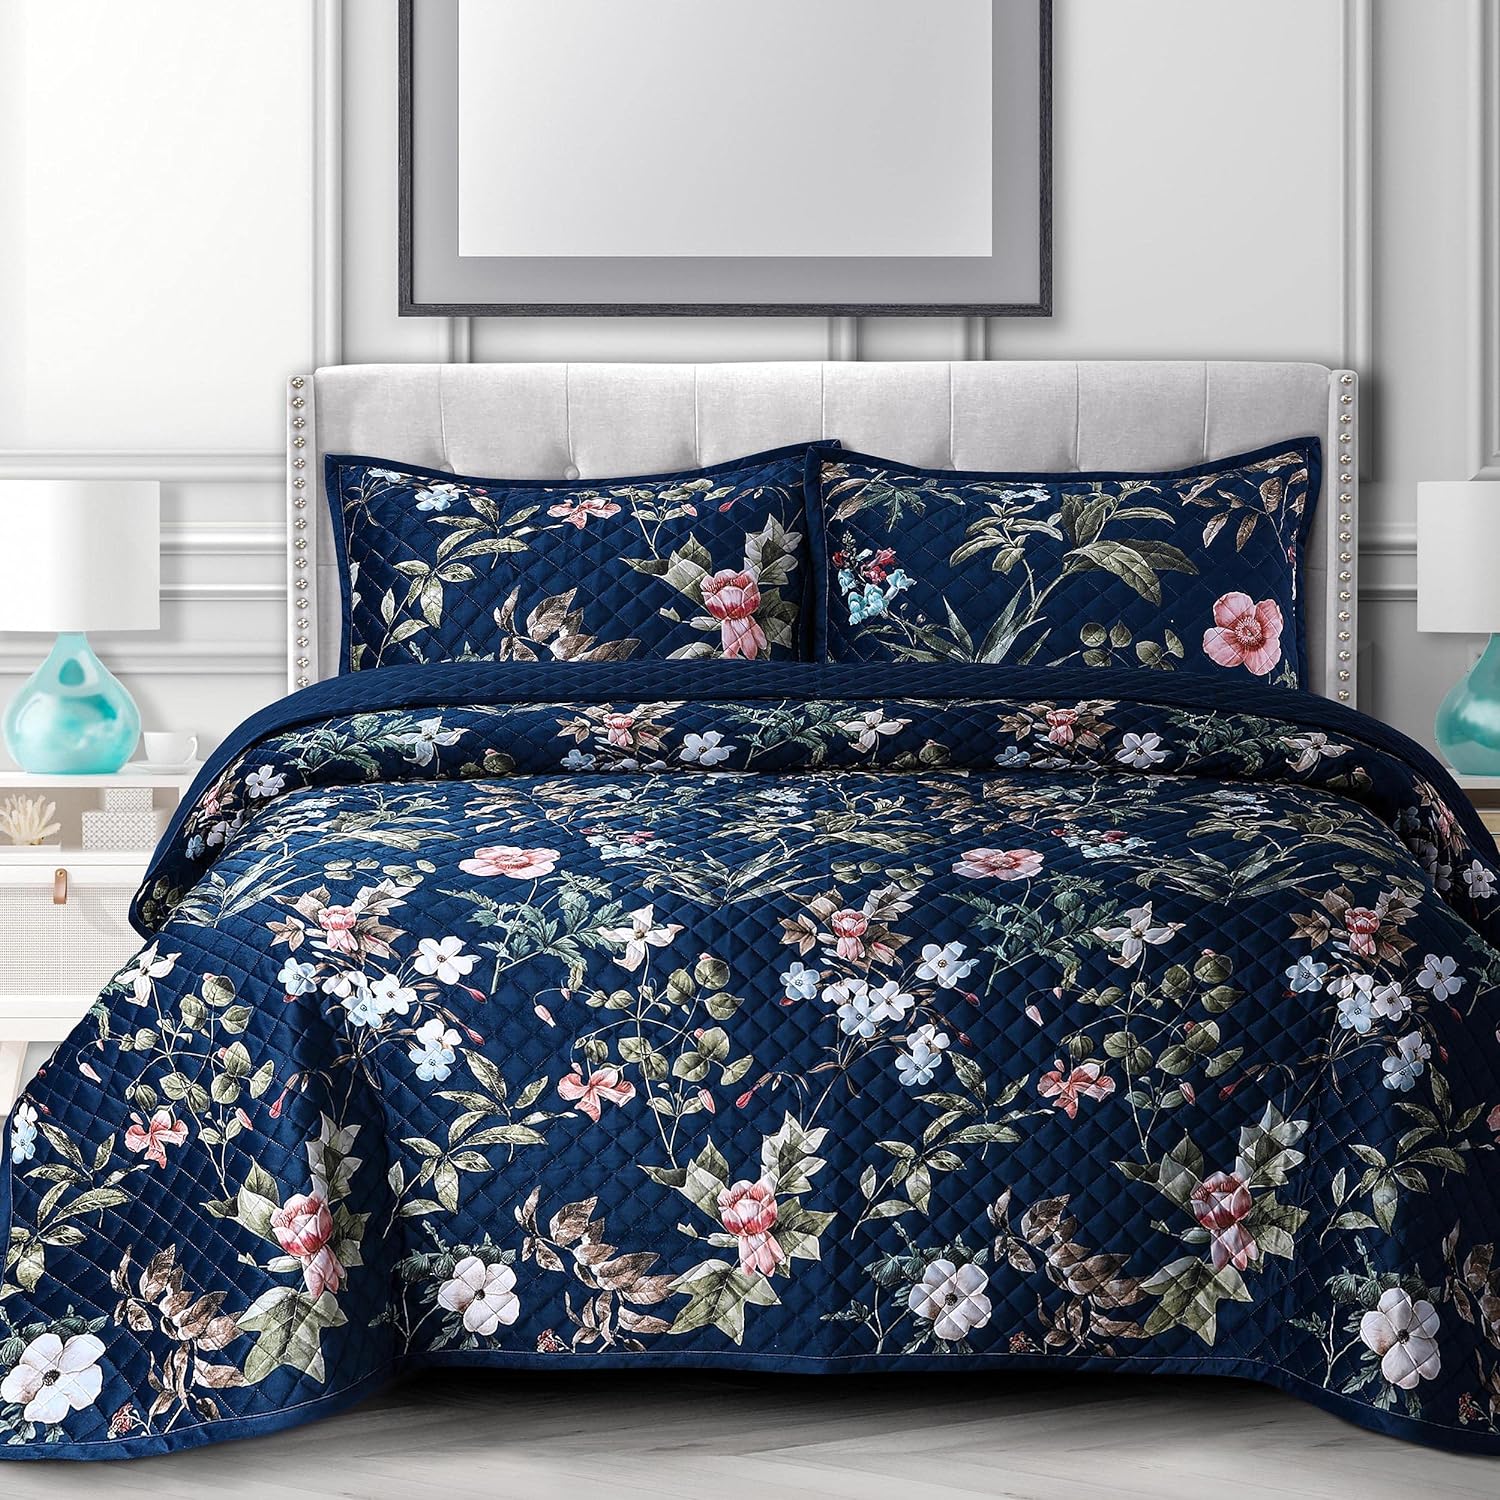 Calla Printed Oversized Velvet Ultra-Soft Luxury Quilt Set with Shams, Wrinkle & Fade Resitant, All-Season, Diamond Stitching, Durable and Fine Quality, Queen, Multicolor